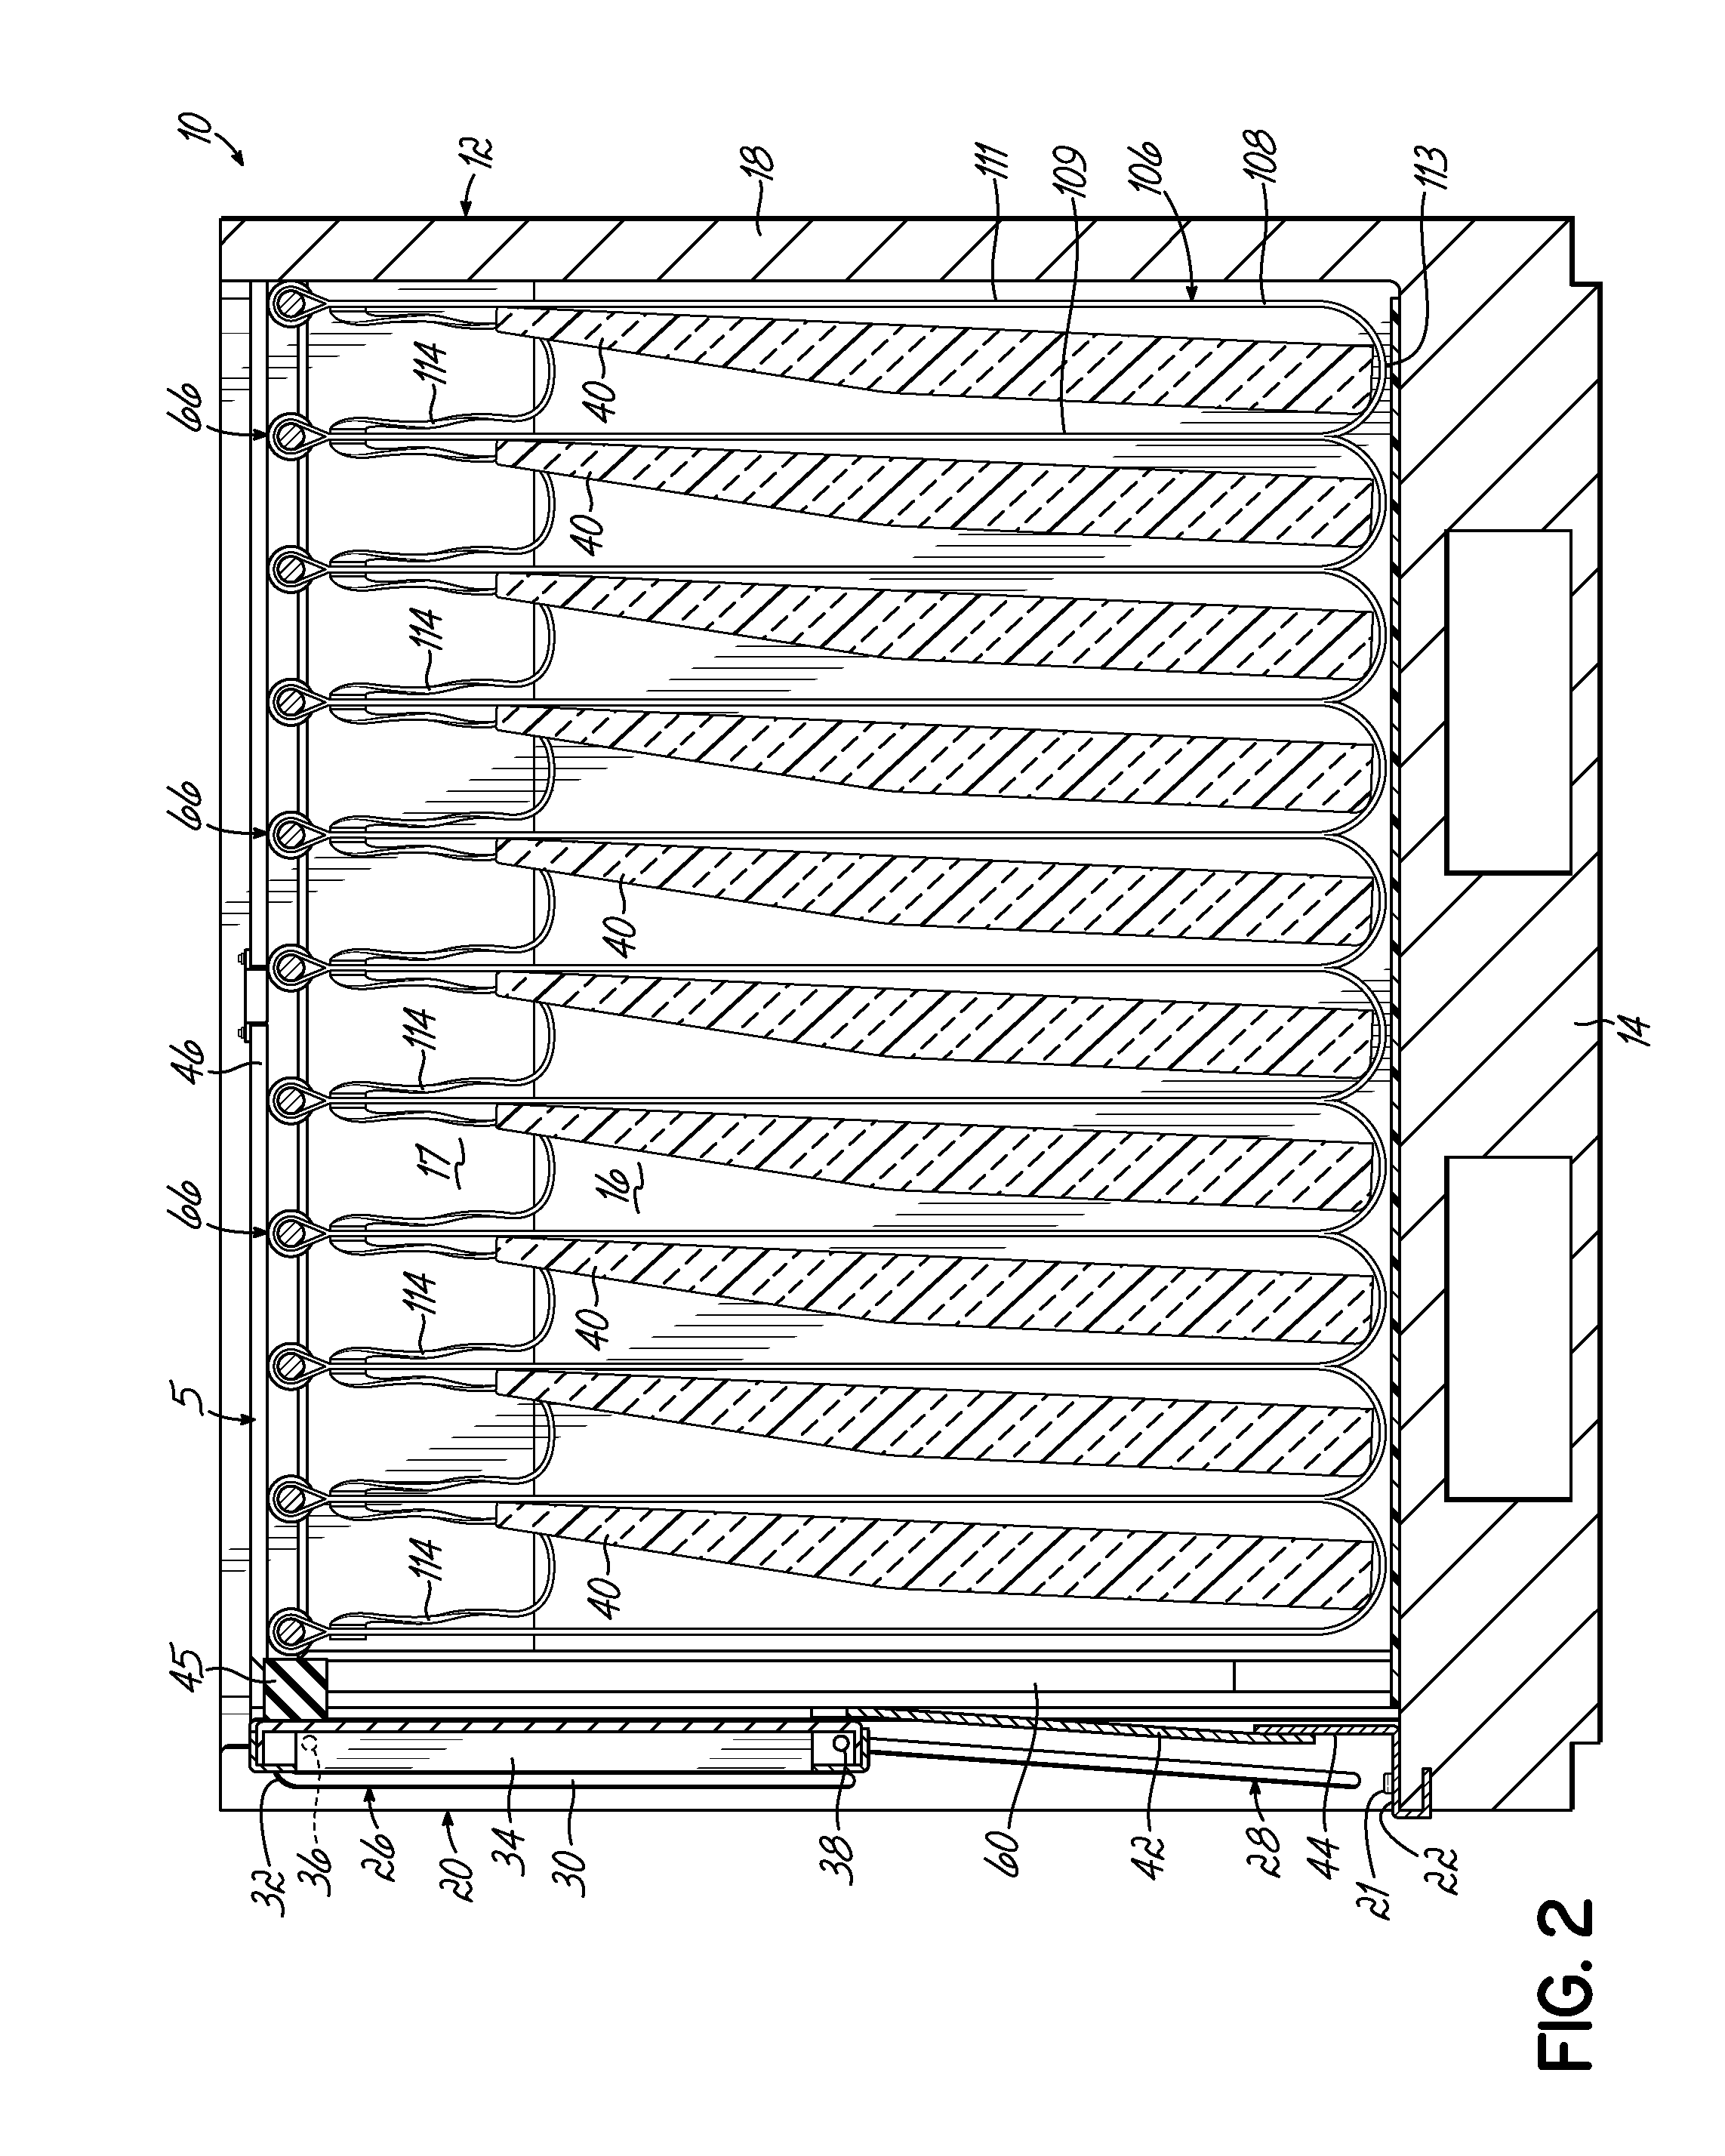 Container Having Movable Support Member Assemblies For Supporting Dunnage and Movable Door